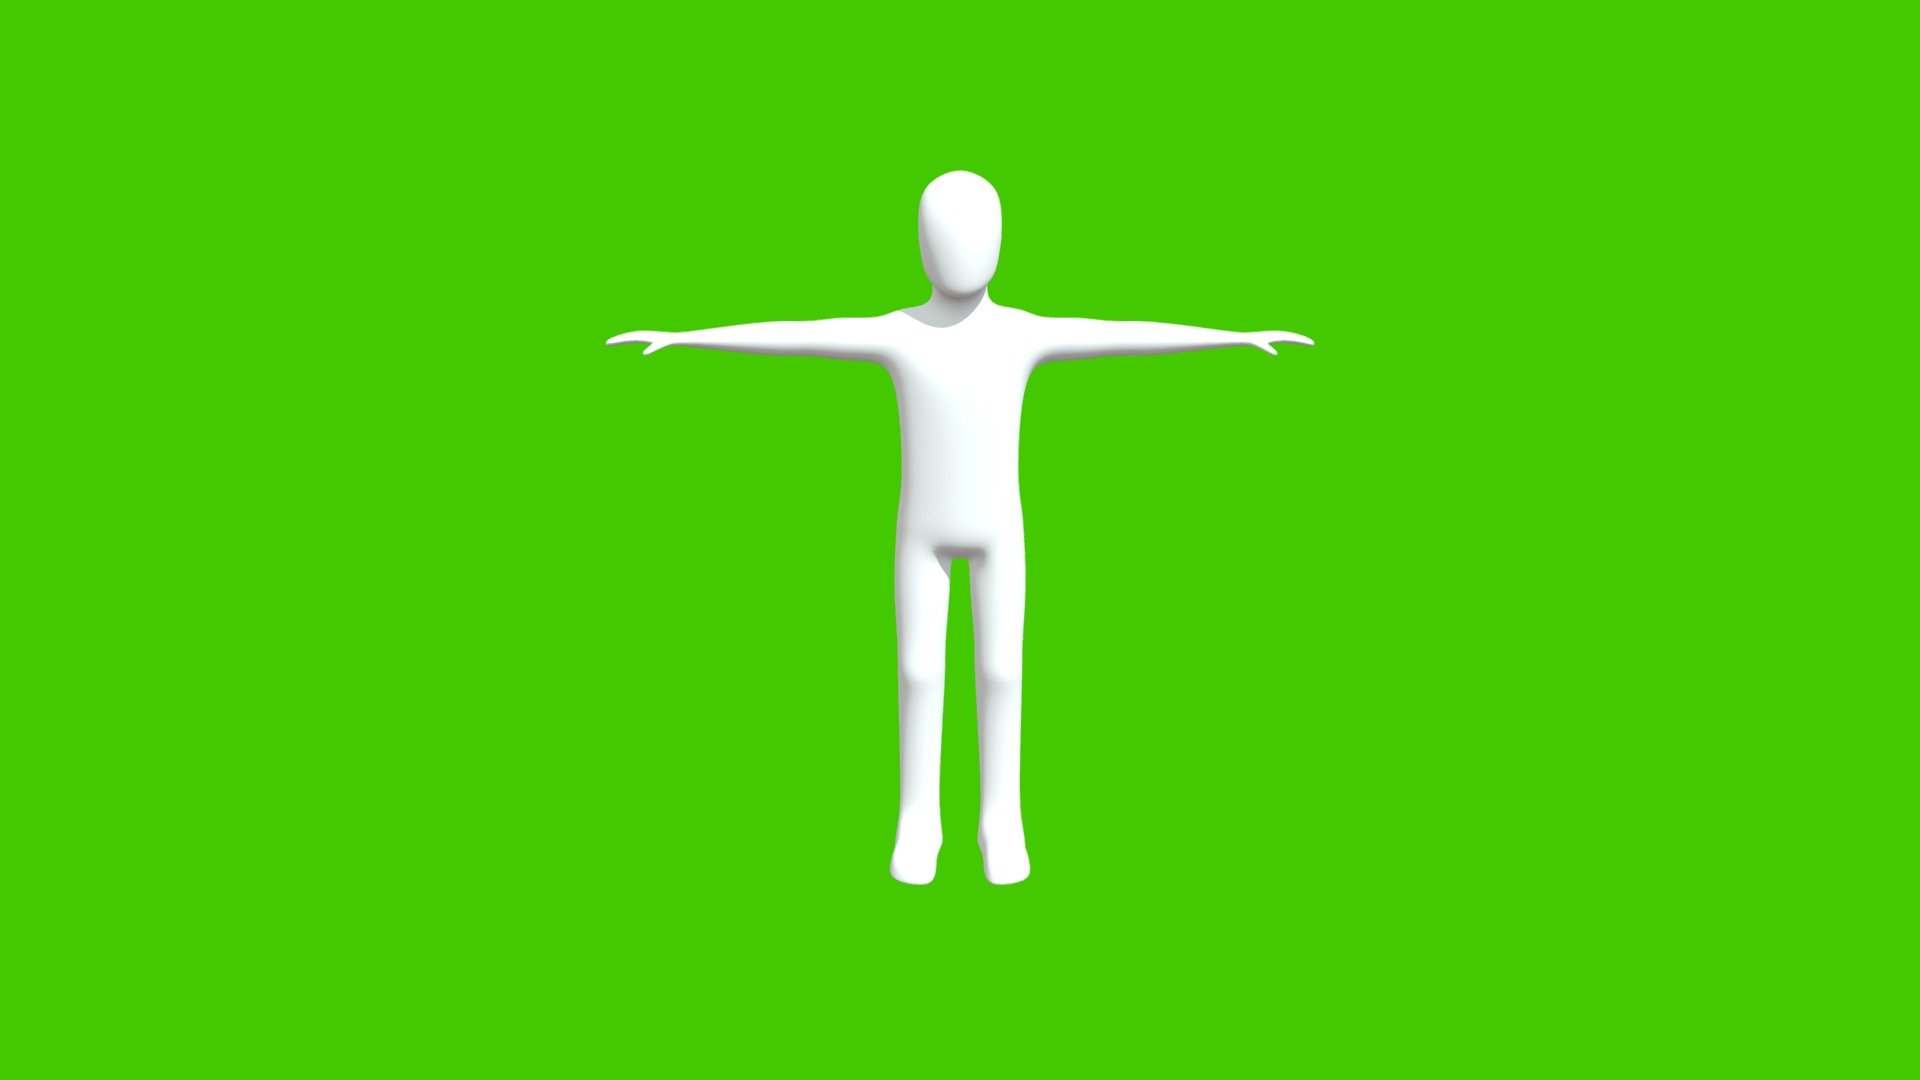 Here's a basic character mannequin model for anyone to use for rigging and making animations. Practice makes perfect. You can download it for free and try different things to make the best use of this 3d model 3d model